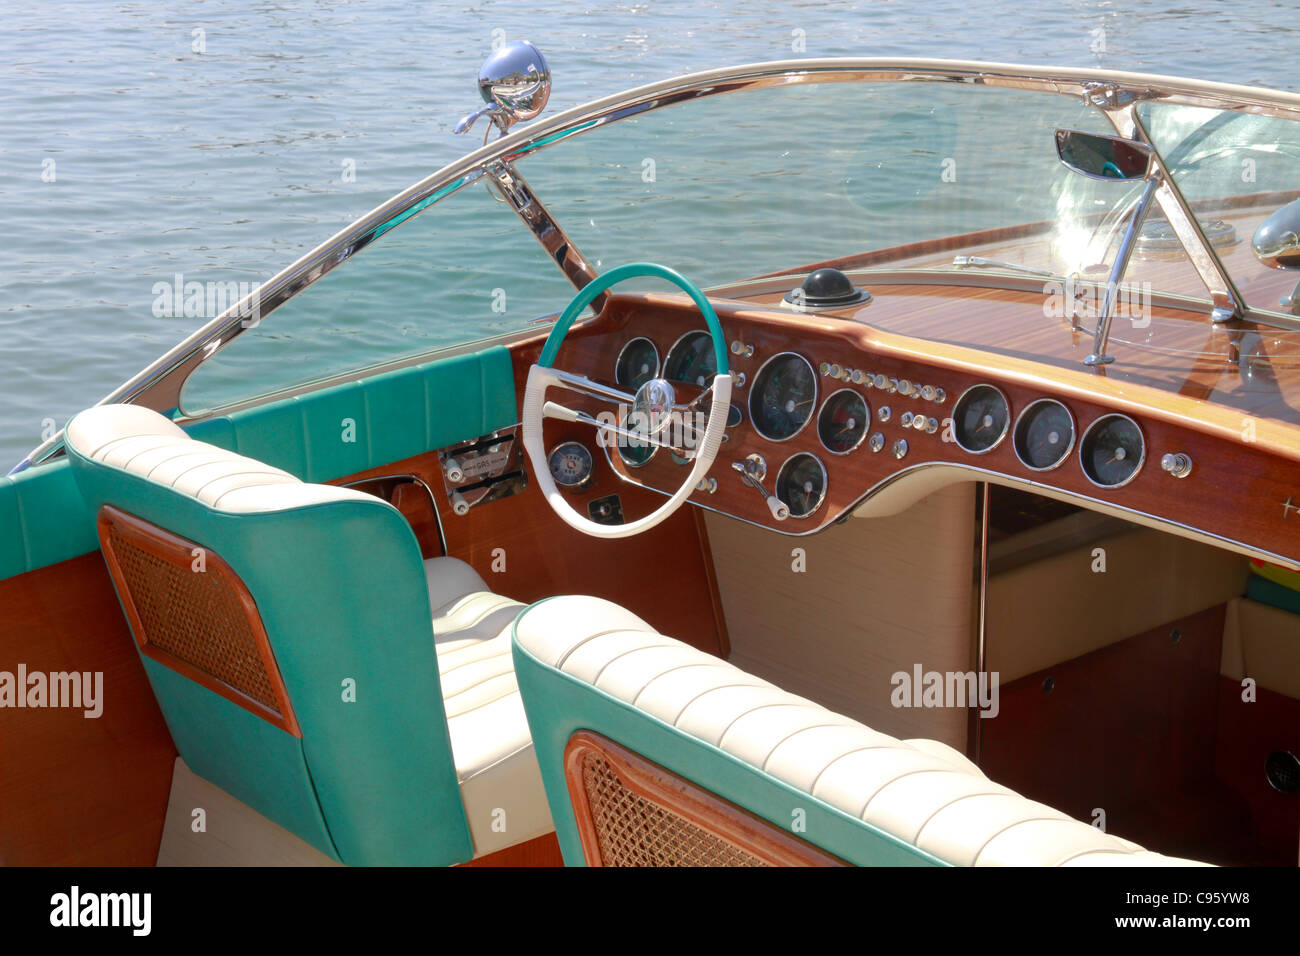 Motorboat old vintage classic Stock Photo